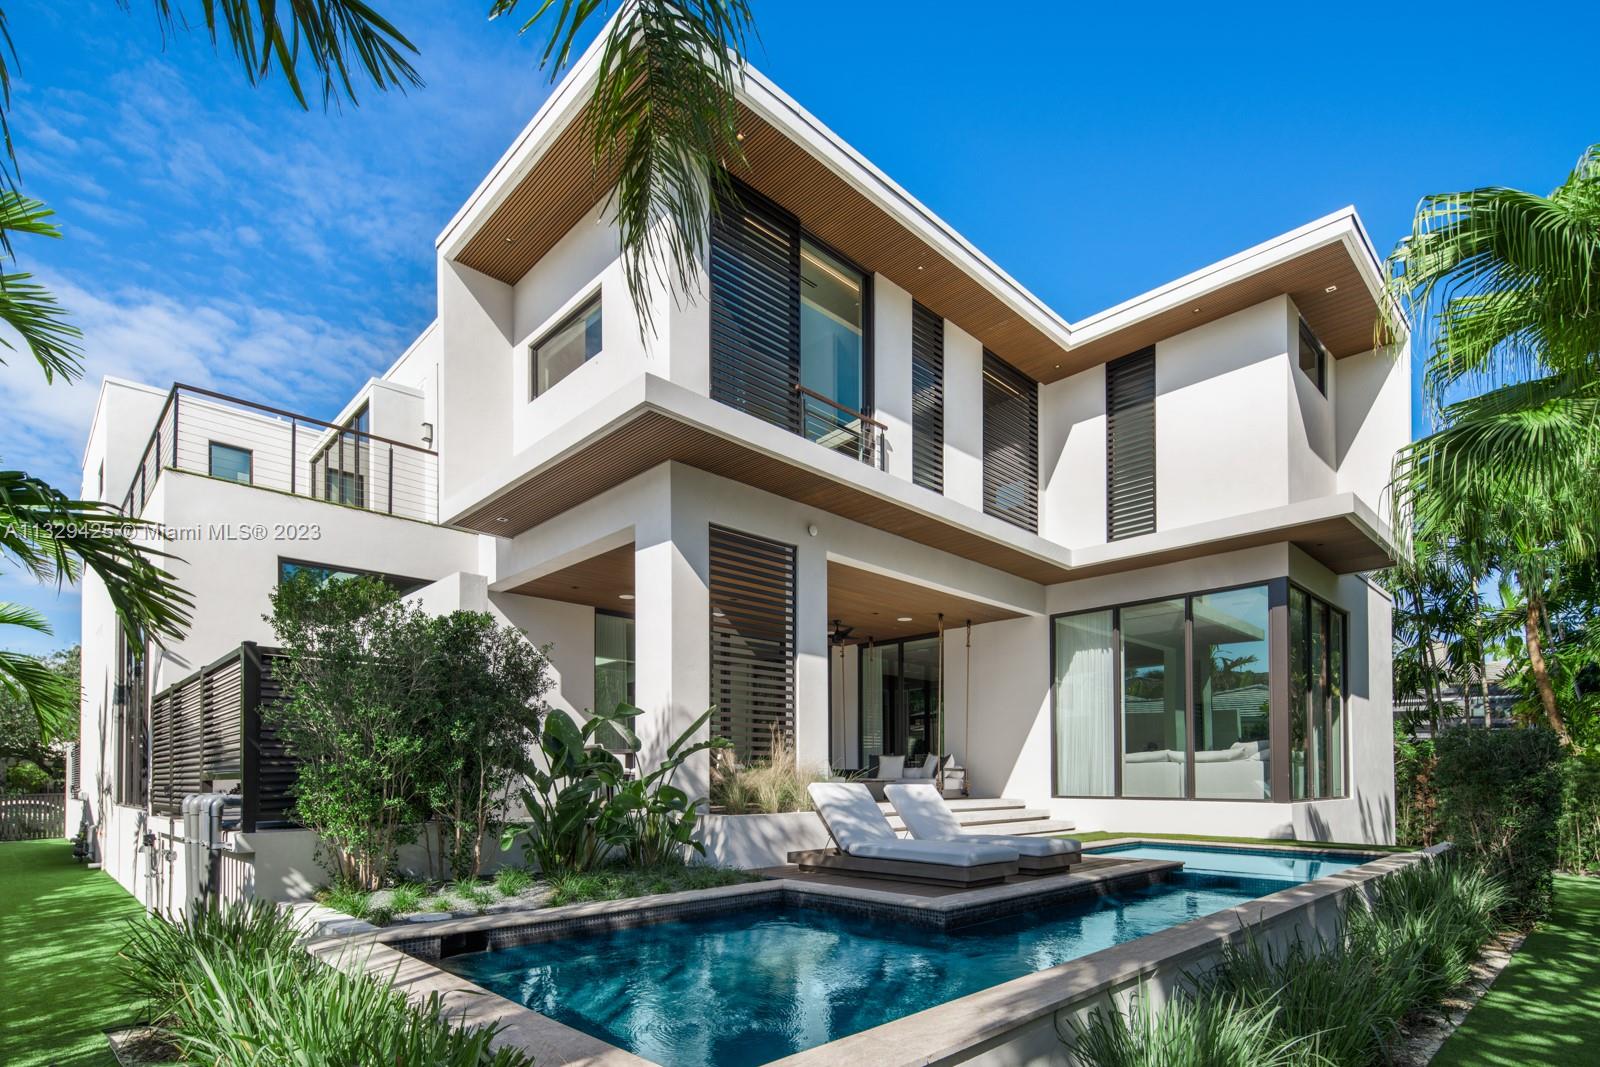 This recently completed turn-key residence in the Village of Bal Harbour, one of the most private and secure communities in Miami, has been designed with the discerning buyer in mind. The 6BD, 6.5BA smart-home designed by celebrity designers, Sire Design, offers a wide variety of unique materials, designer furniture, and finishes such as piano lacquer cabinetry, green onyx, polished Arabescato Rosso marble, black-stained white oak, and Roman Clay. The property also features a custom Mia Cucina chef’s kitchen with Miele appliances, a primary suite with a luxurious bath, dual oversized closets, and commercial-grade sauna. Additional touches include a grand staircase with a statement chandelier, fully equipped gym, steam-room, and a resort-style terrace with hot tub, pool, and summer kitchen.